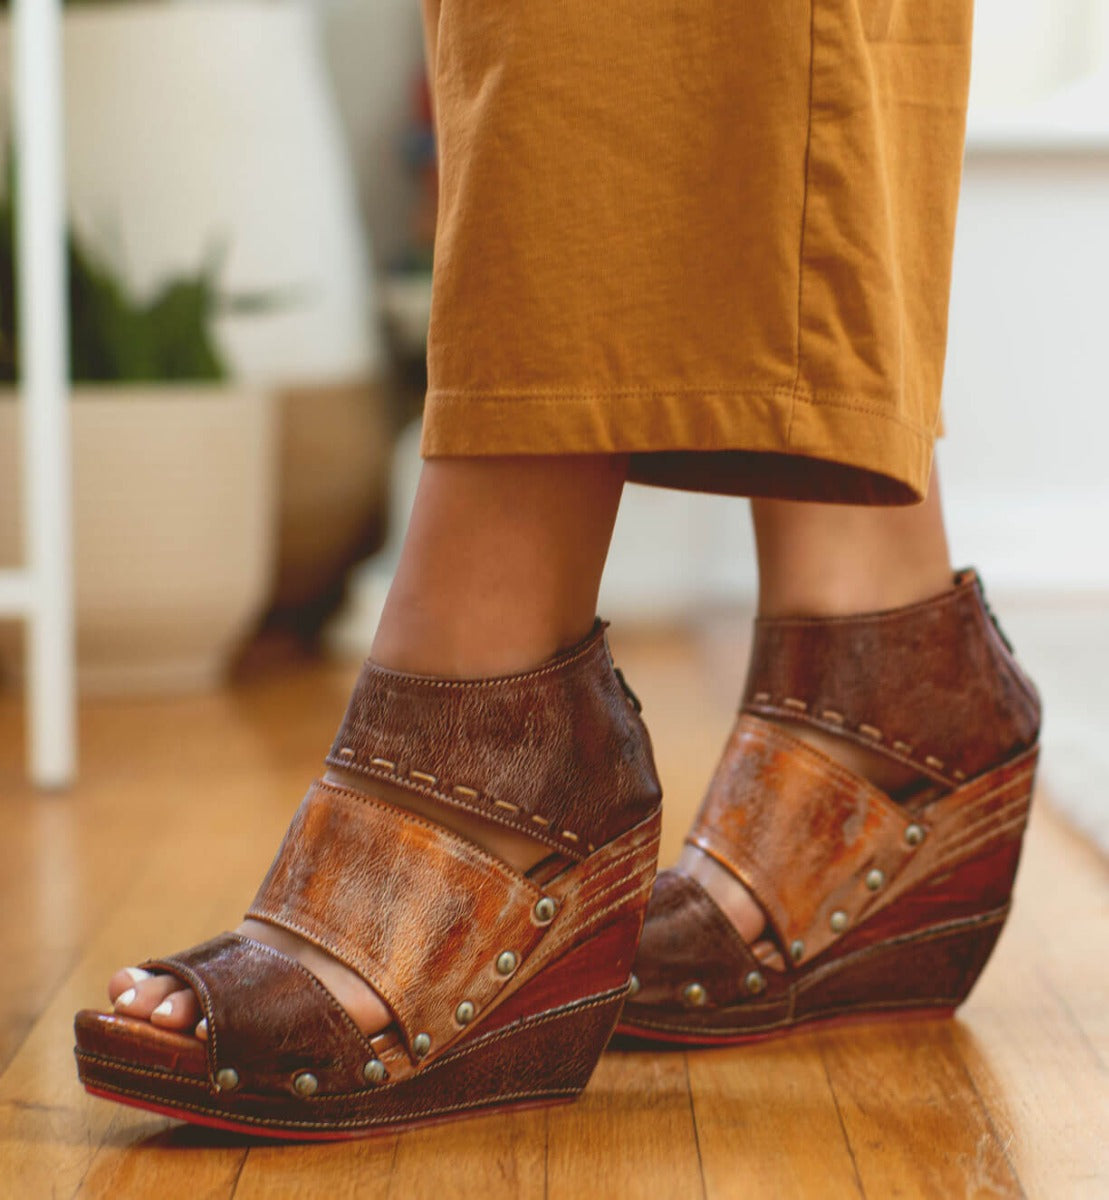 A woman's feet standing on a wooden floor in Bed Stu Jessie brown wedge sandals.